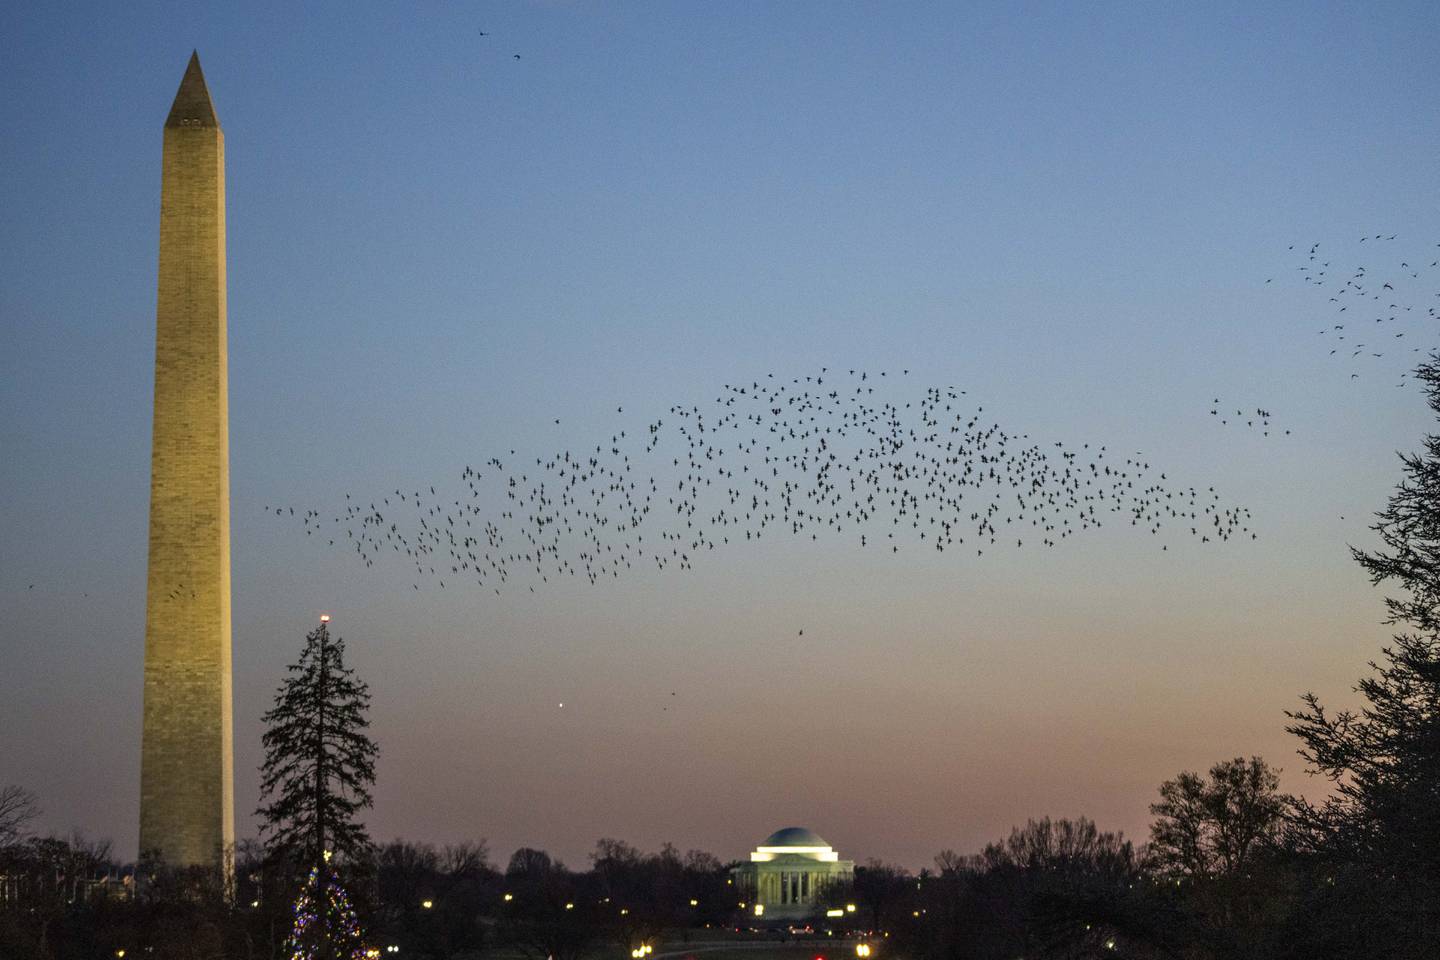 Murmuration of blackbirds flying over the White House grounds with the Washington Monument and Lincoln Memorial behind